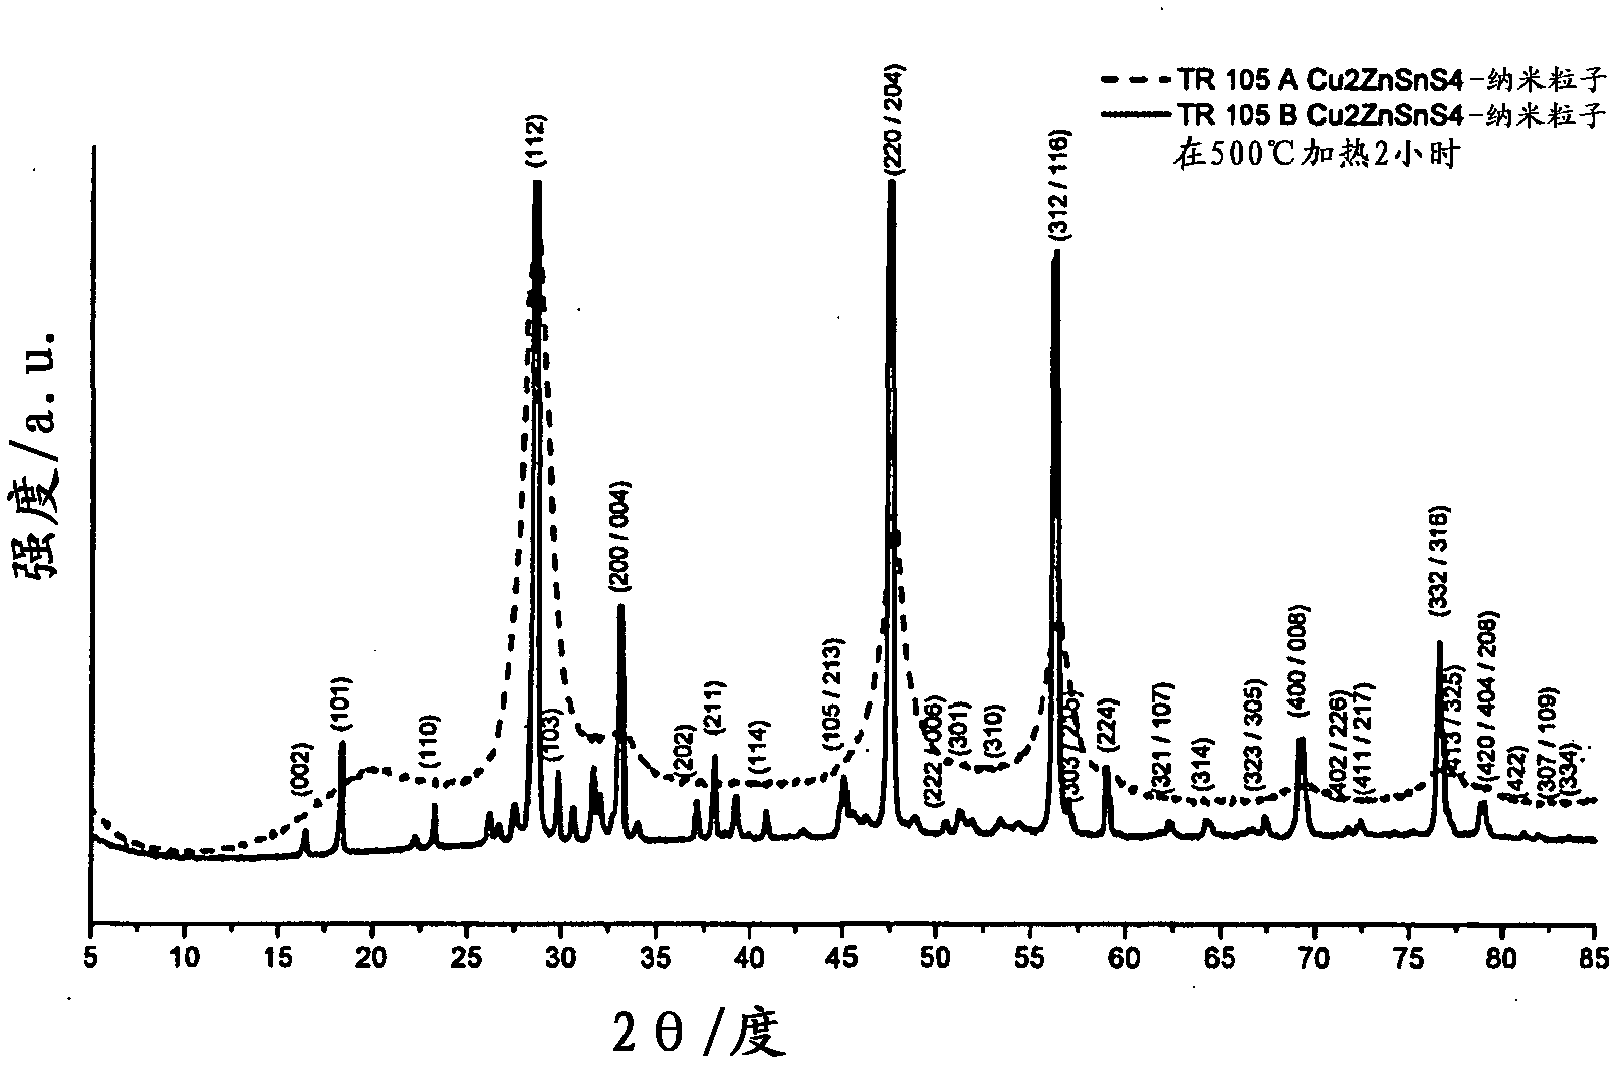 Composite material comprising nanoparticles and production of photoactive layers containing quaternary, pentanary and higher-order composite semiconductor nanoparticles